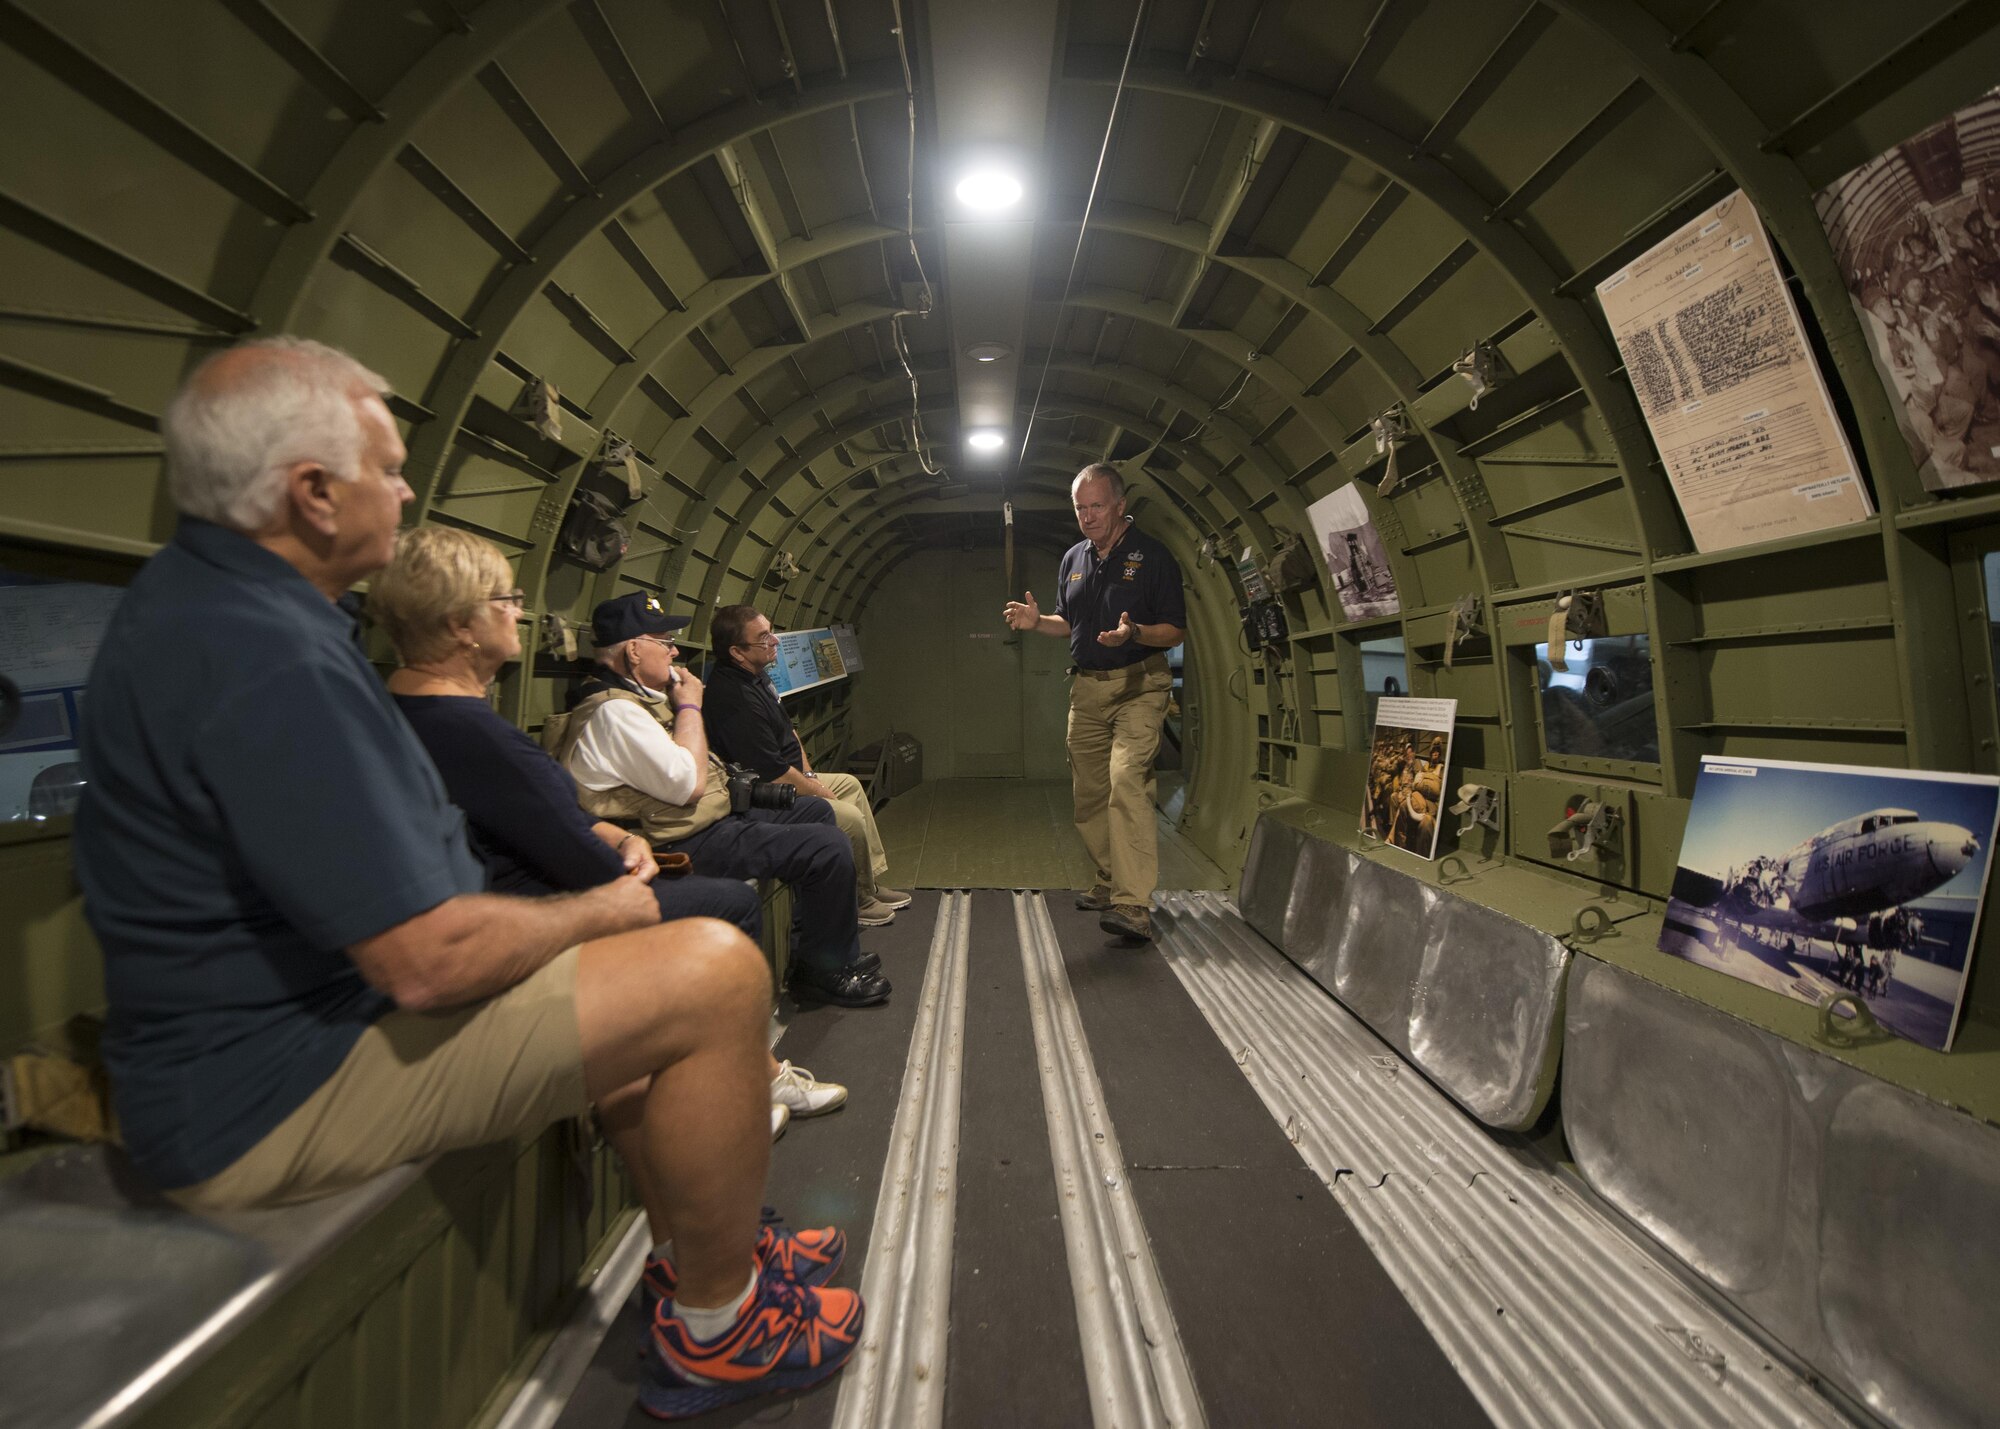 Retired U.S. Army Col. Bob Leicht, Air Mobility Command Museum volunteer, gives visitors a tour of the C-47A Skytrain, “Turf and Sport Special,” during the AMC Museum’s Festival of Flight 30th Anniversary celebration Sept. 24, 2016, at the AMC Museum on Dover Air Force Base, Del. This aircraft, which has been undergoing an extensive restoration, saw action on D-Day, the invasion of Normandy, dropping paratroopers from the 82nd Airborne Division into St. Mere-Eglise, France. (U.S. Air Force photo by Senior Airman Zachary Cacicia)